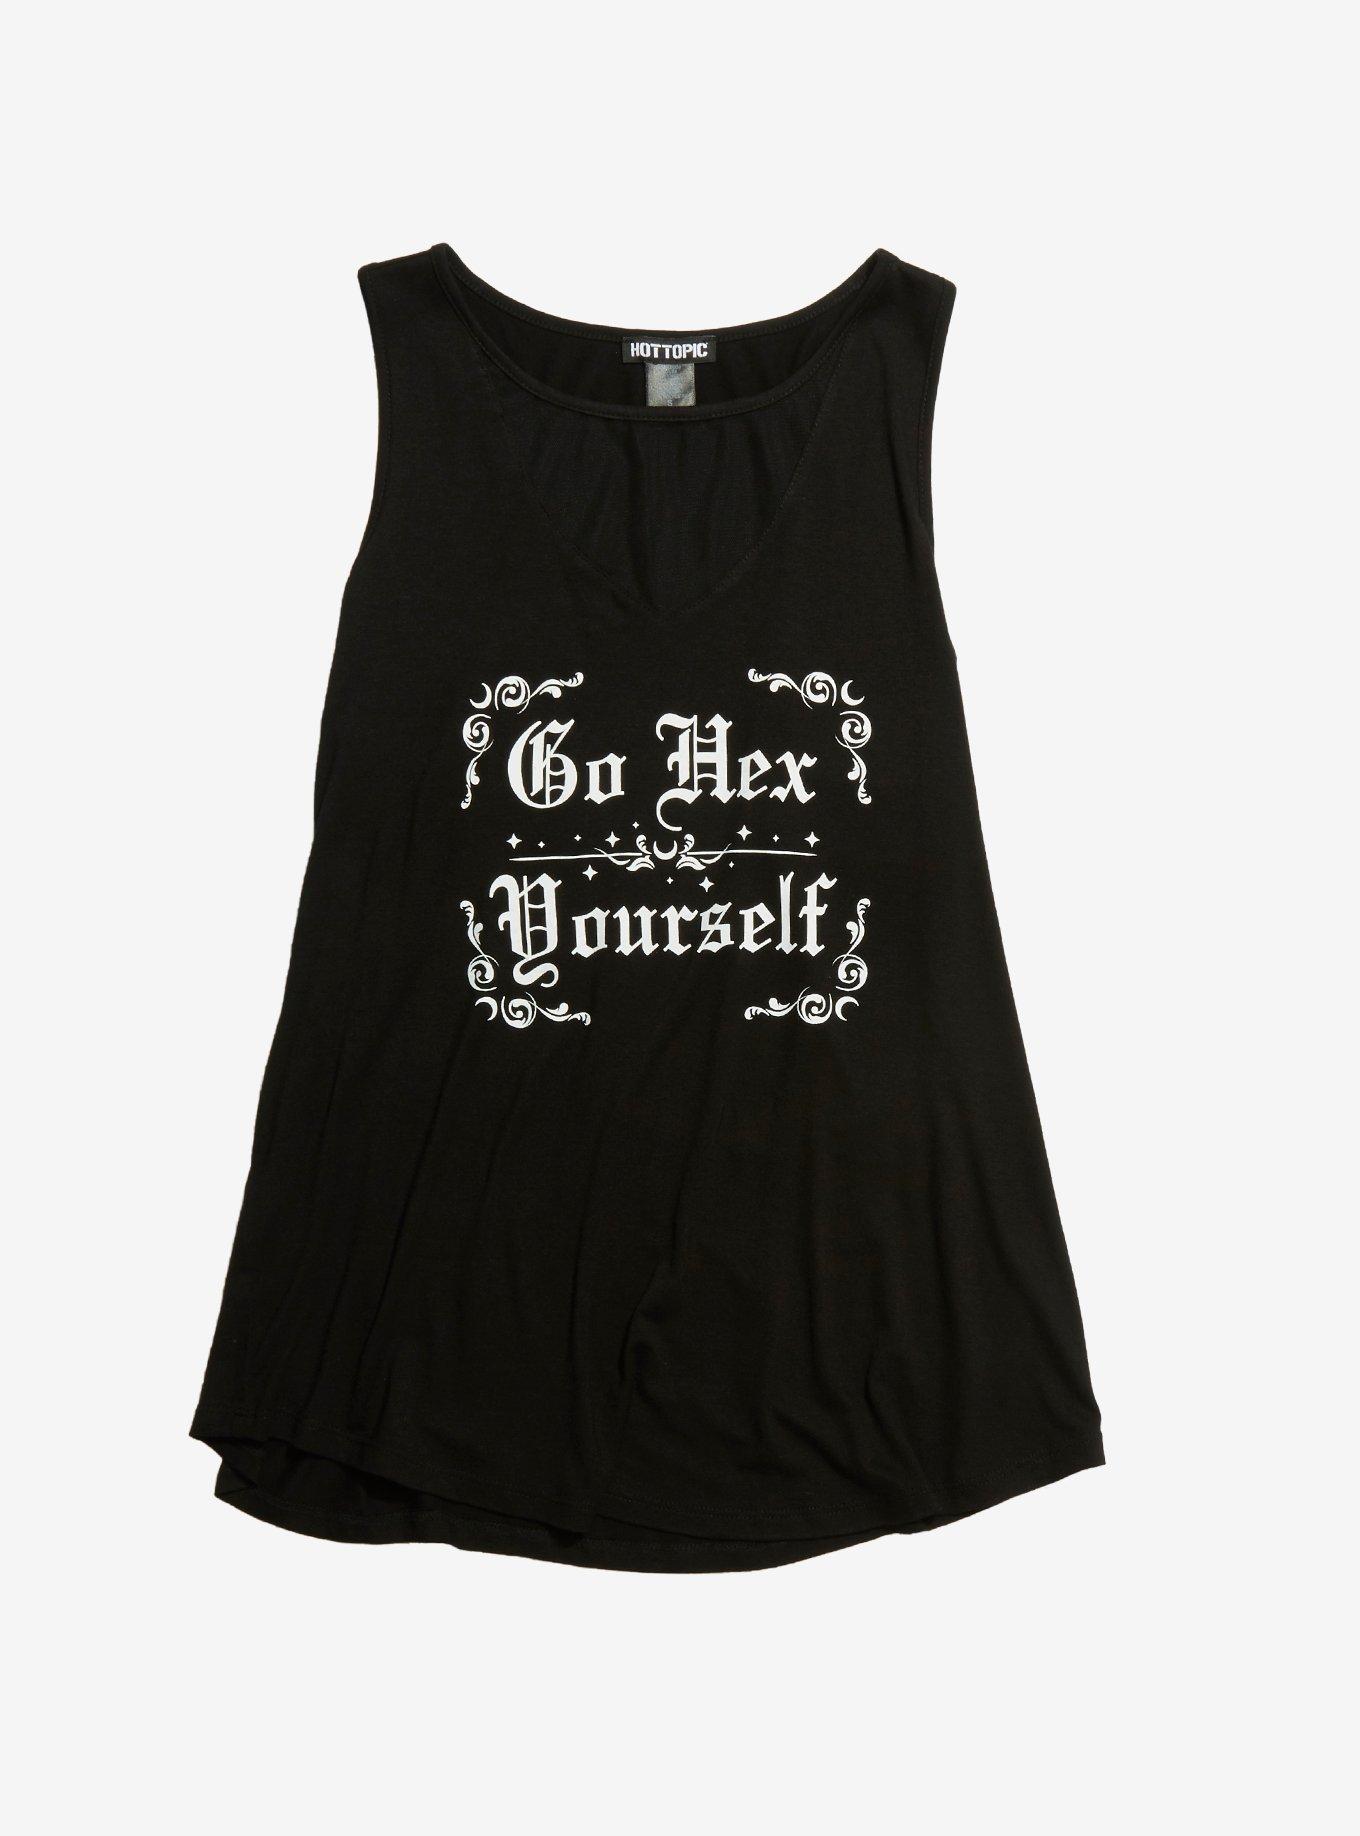 Go Hex Yourself Mesh Front Girls Tank Top Plus Size, WHITE, hi-res